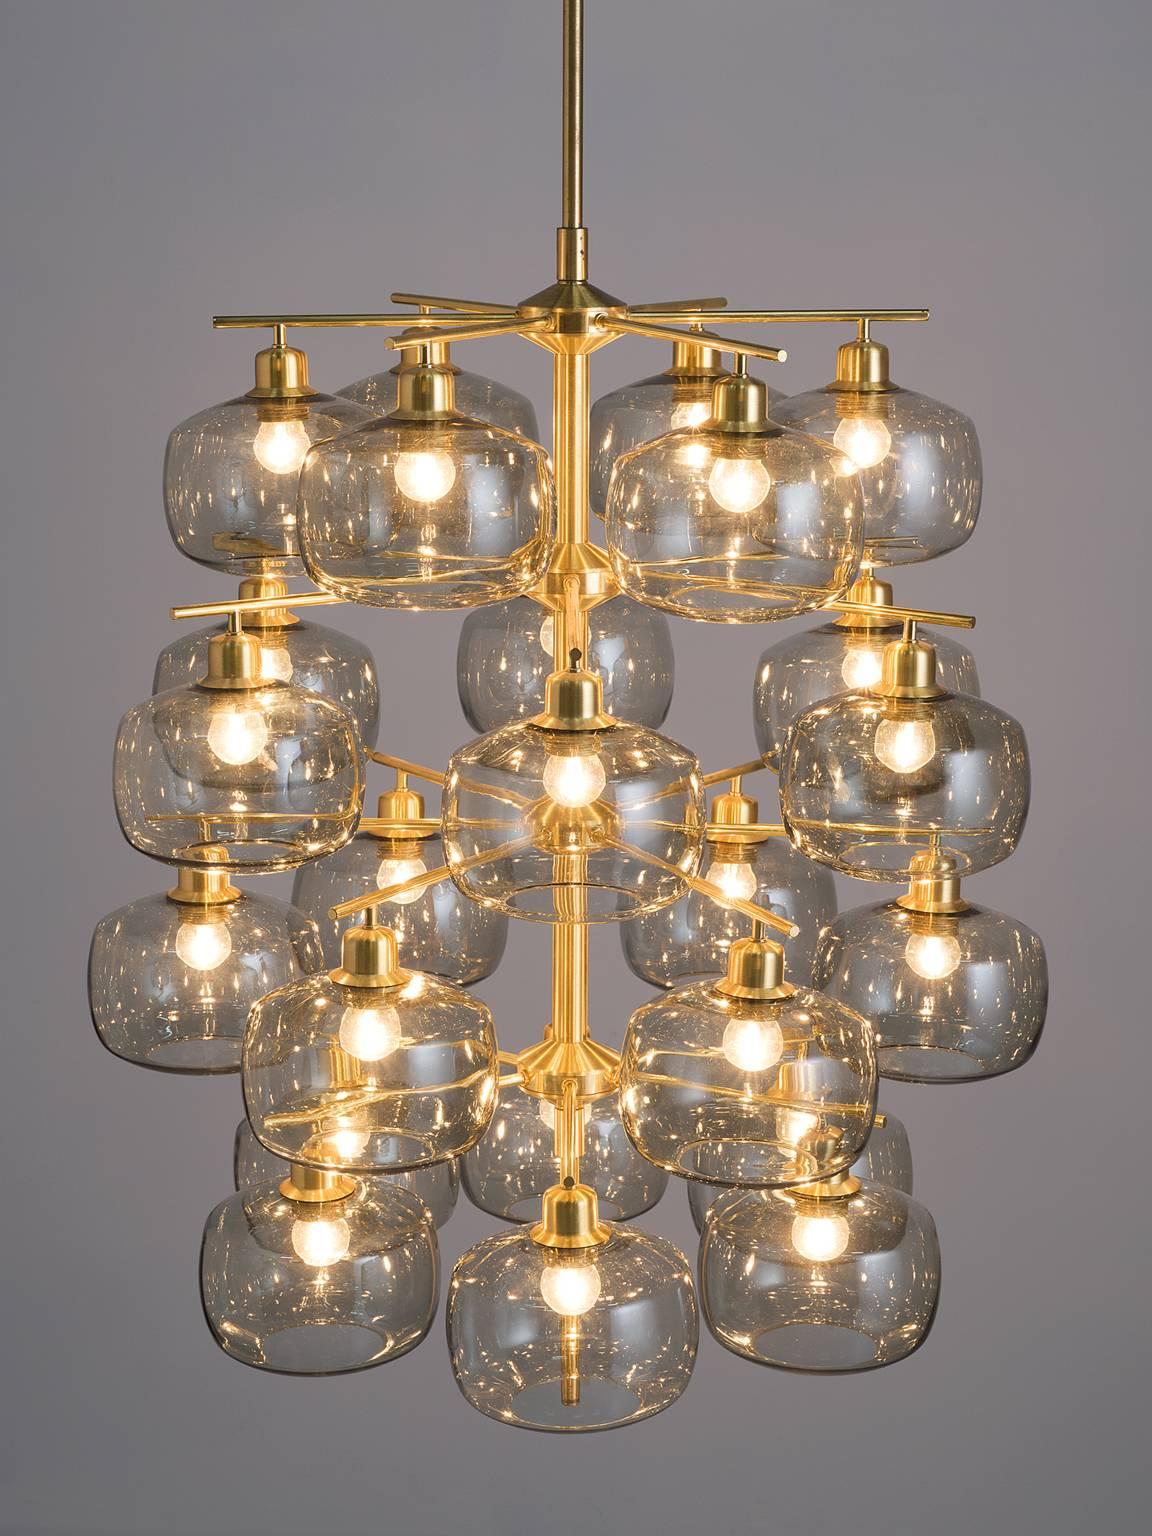 Holger Johansson for Westal, eight chandeliers, brass, smoked glass, Sweden, 1952

This large set of exceptional chandeliers feature a brass frame and translucent bulbs that resemble 'pressed' spheres. These Midcentury pendants are original thanks